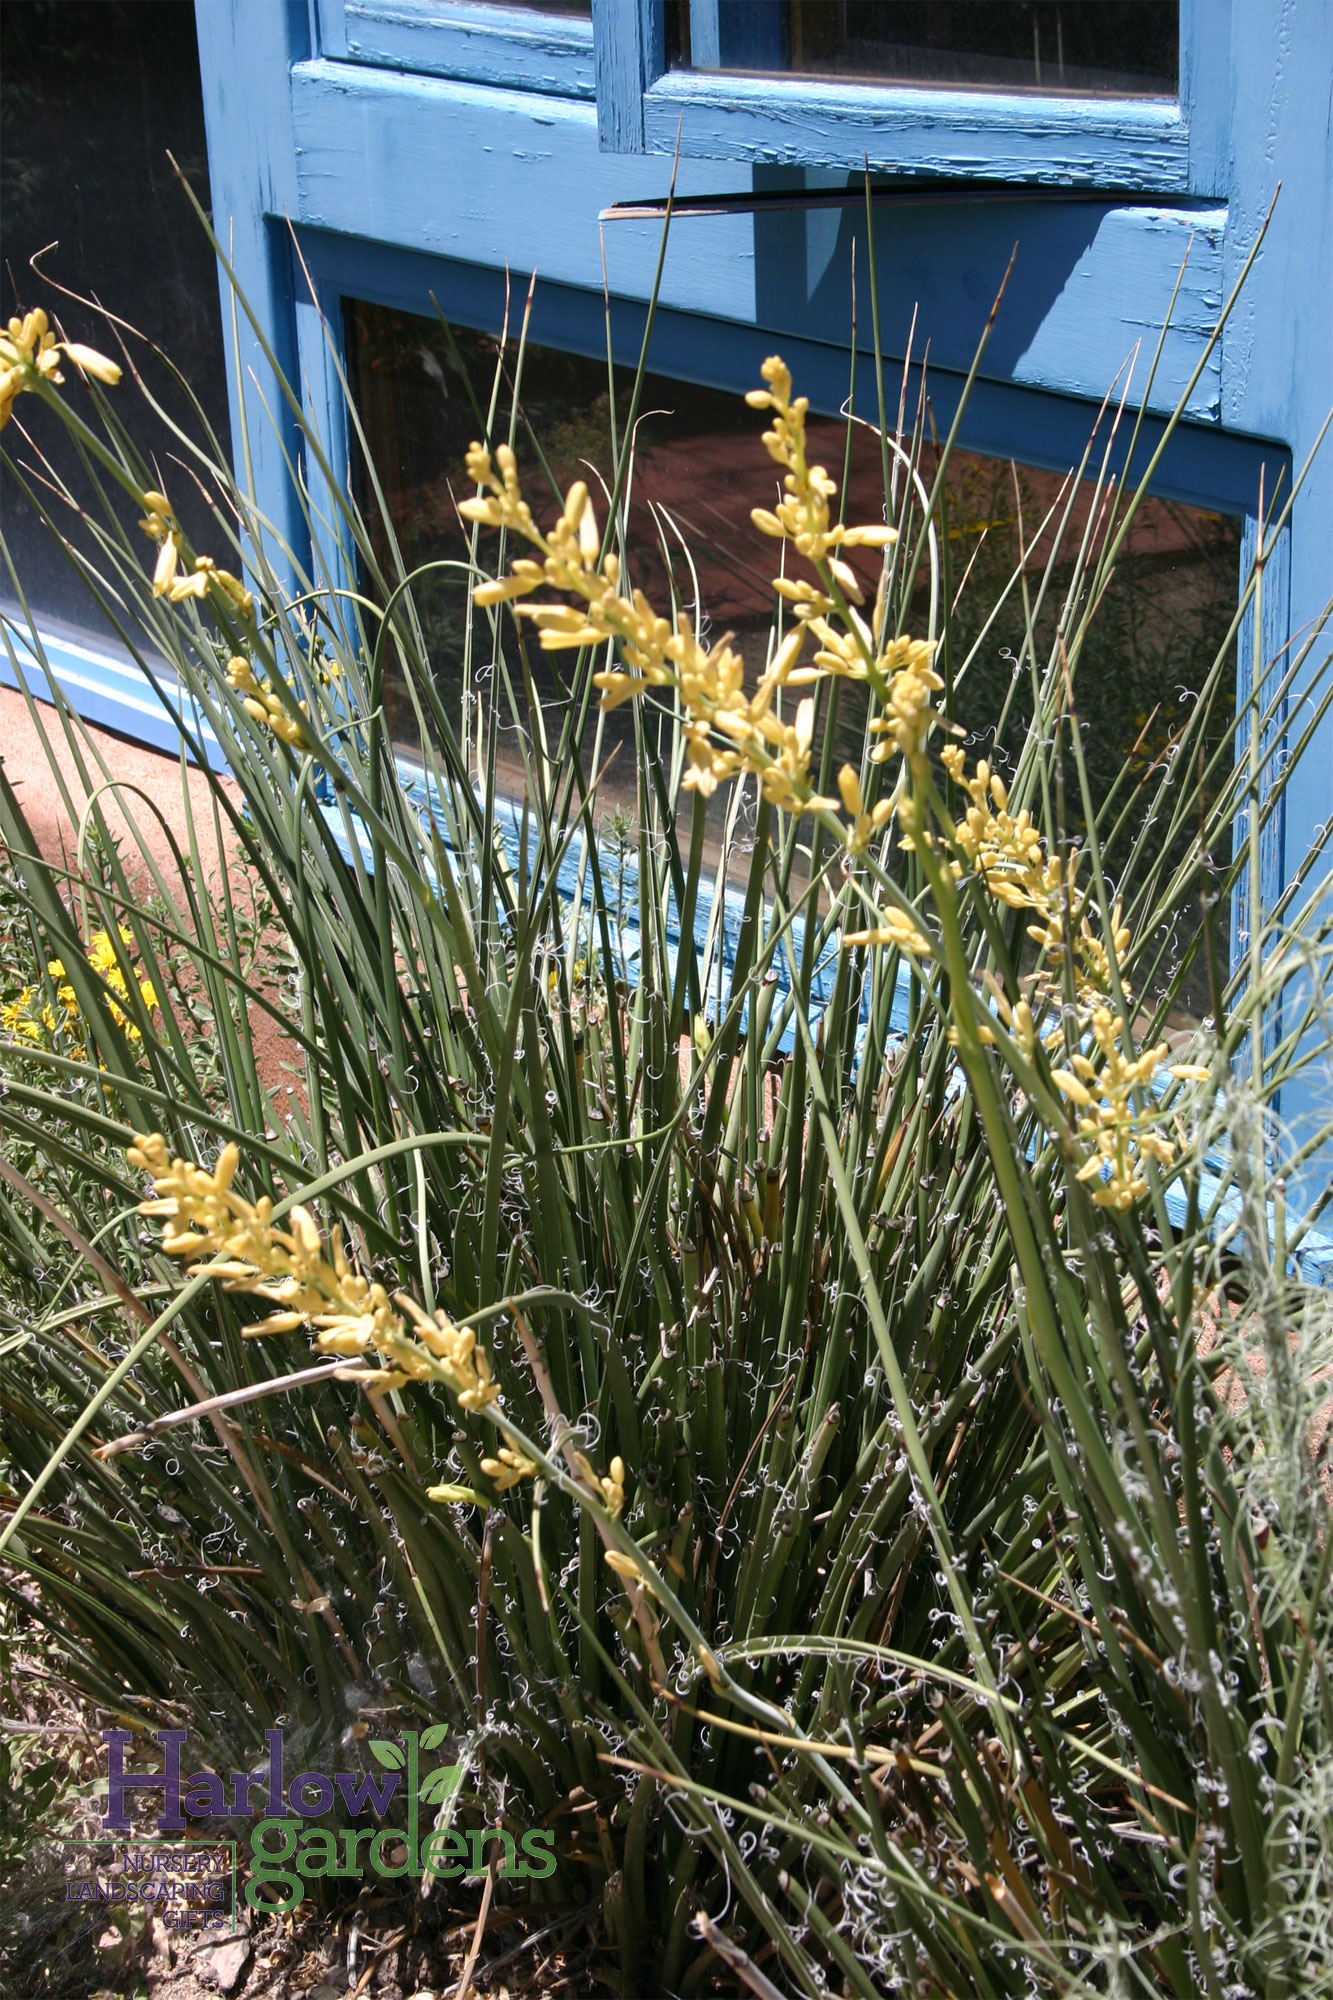 Yellow Yucca for sale at Harlow Gardens Tucson.